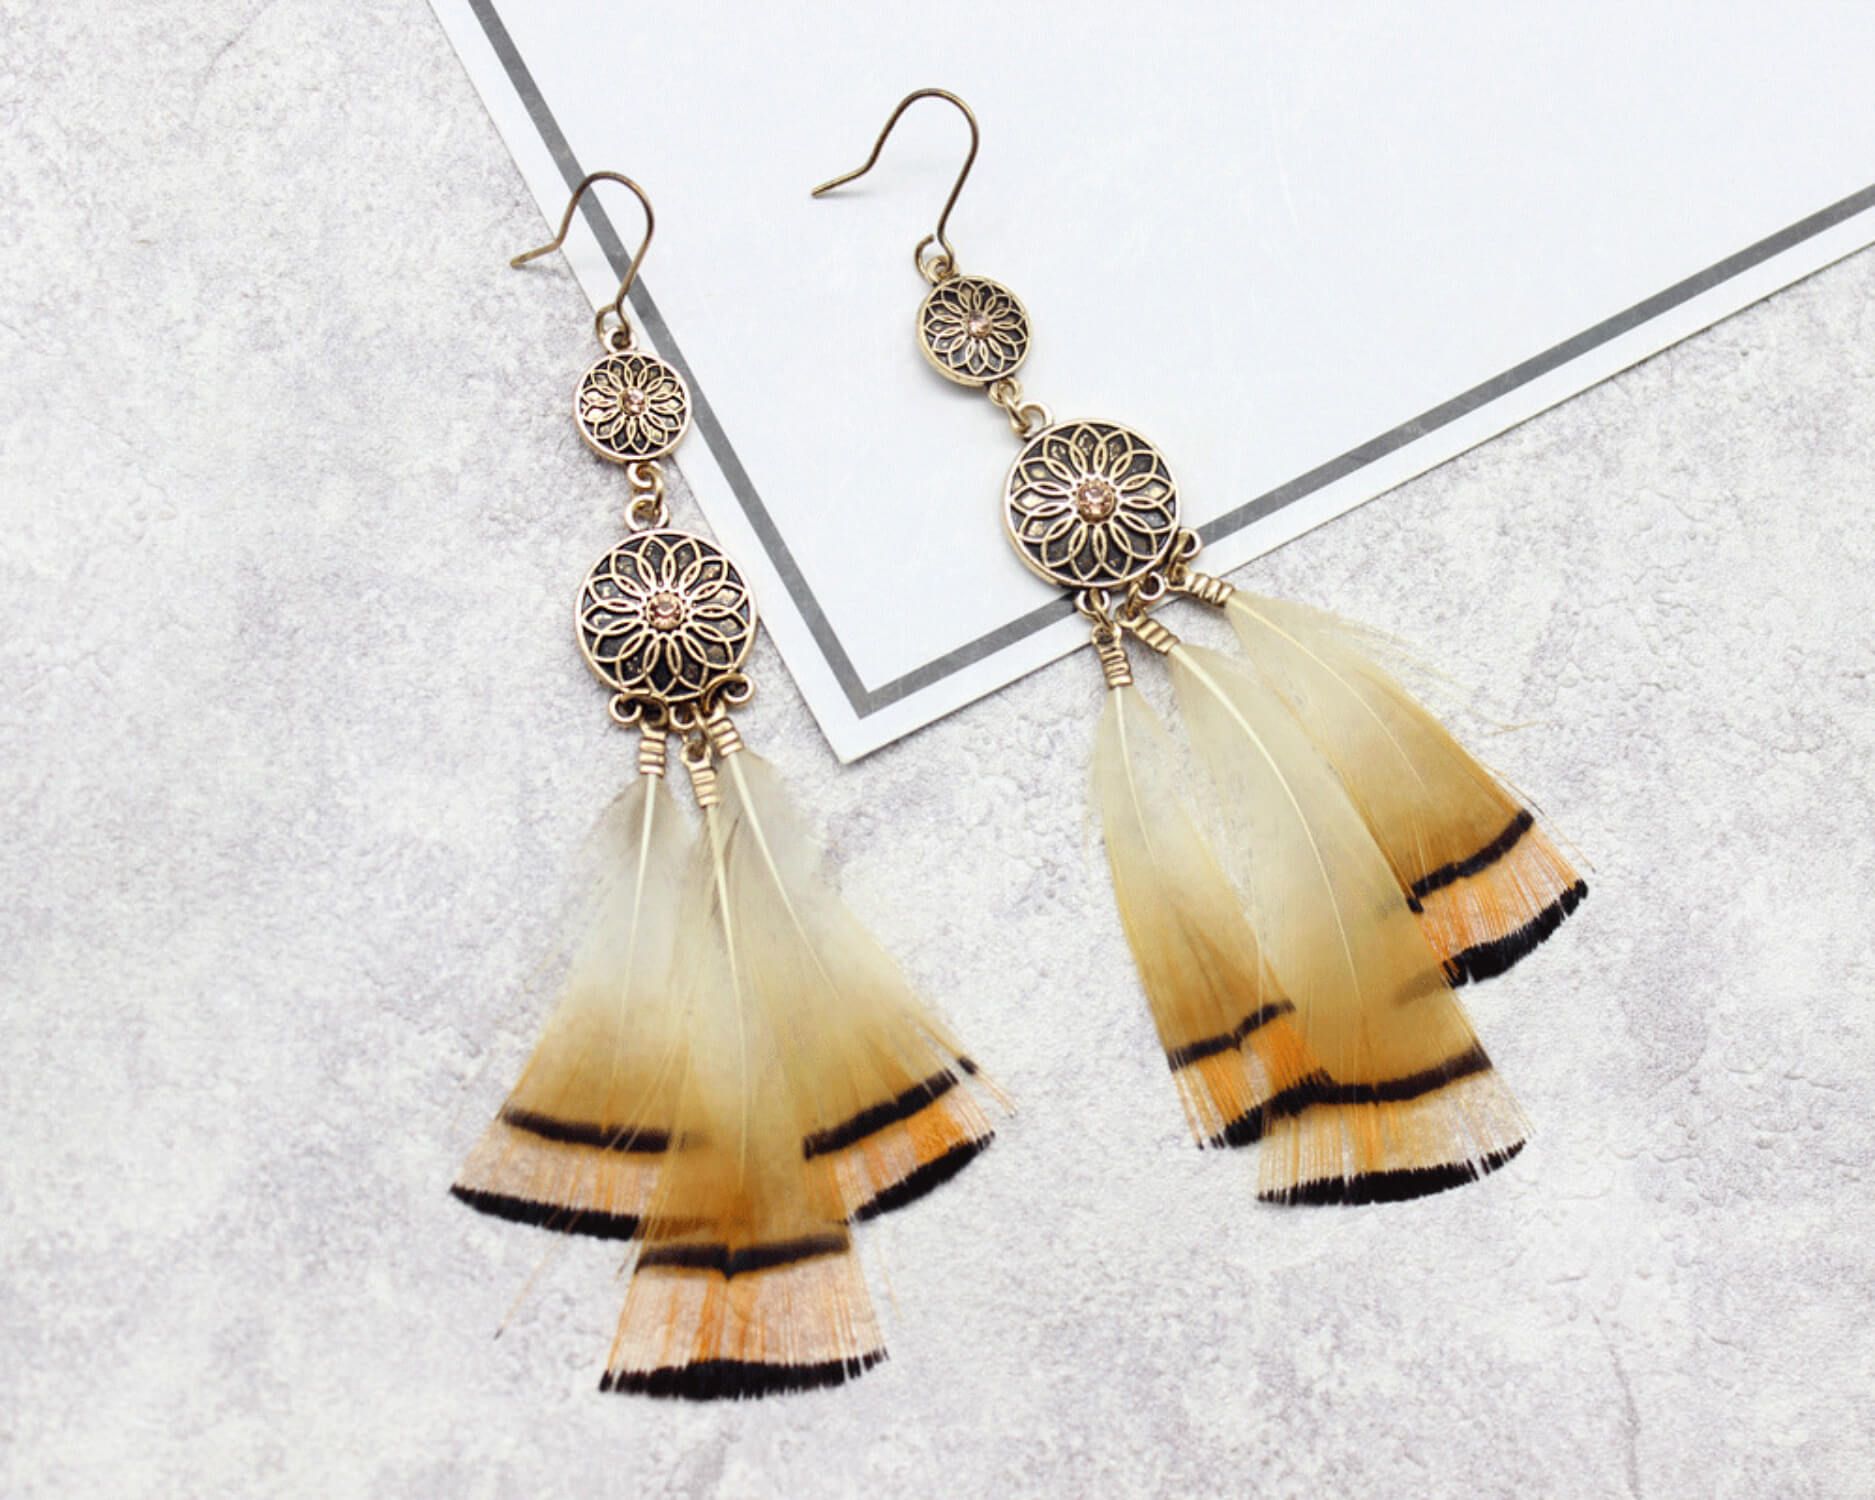 Beautiful Feather Earring - Buy Beautiful Feather Earring Online at ...